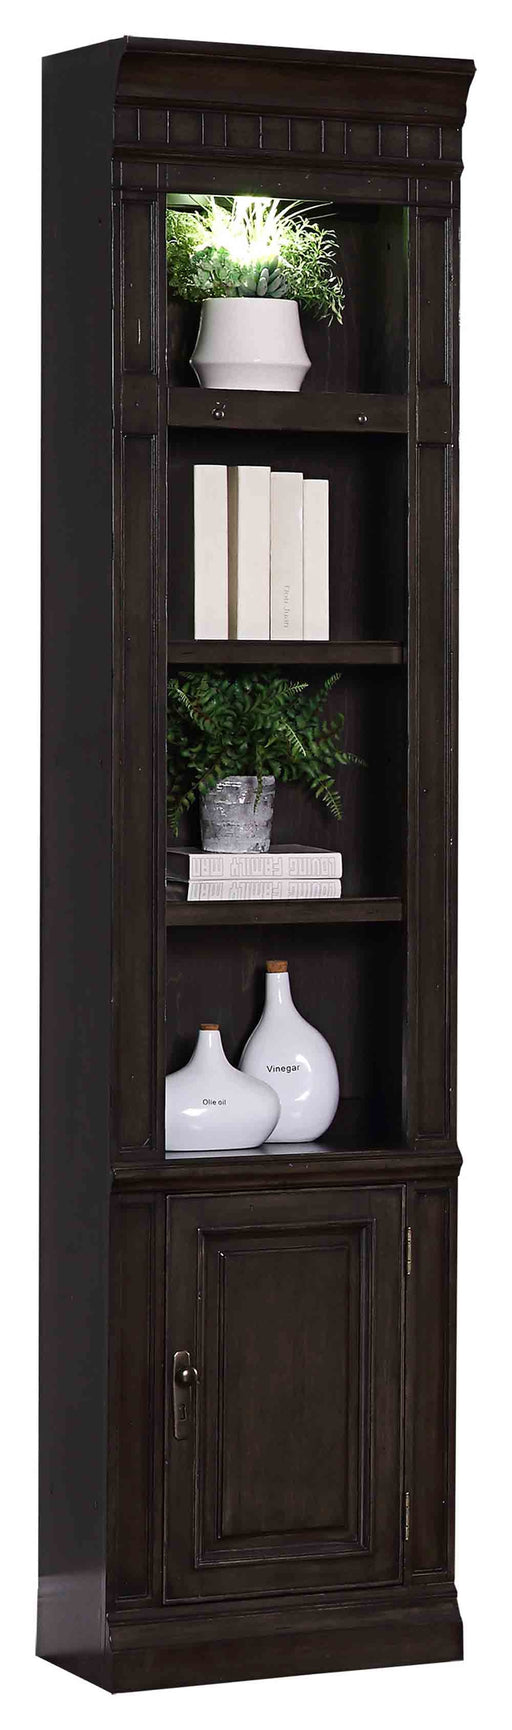 Parker House - Washington Heights 22 in Open Top Bookcase in Washed Charcoal - WAS#420